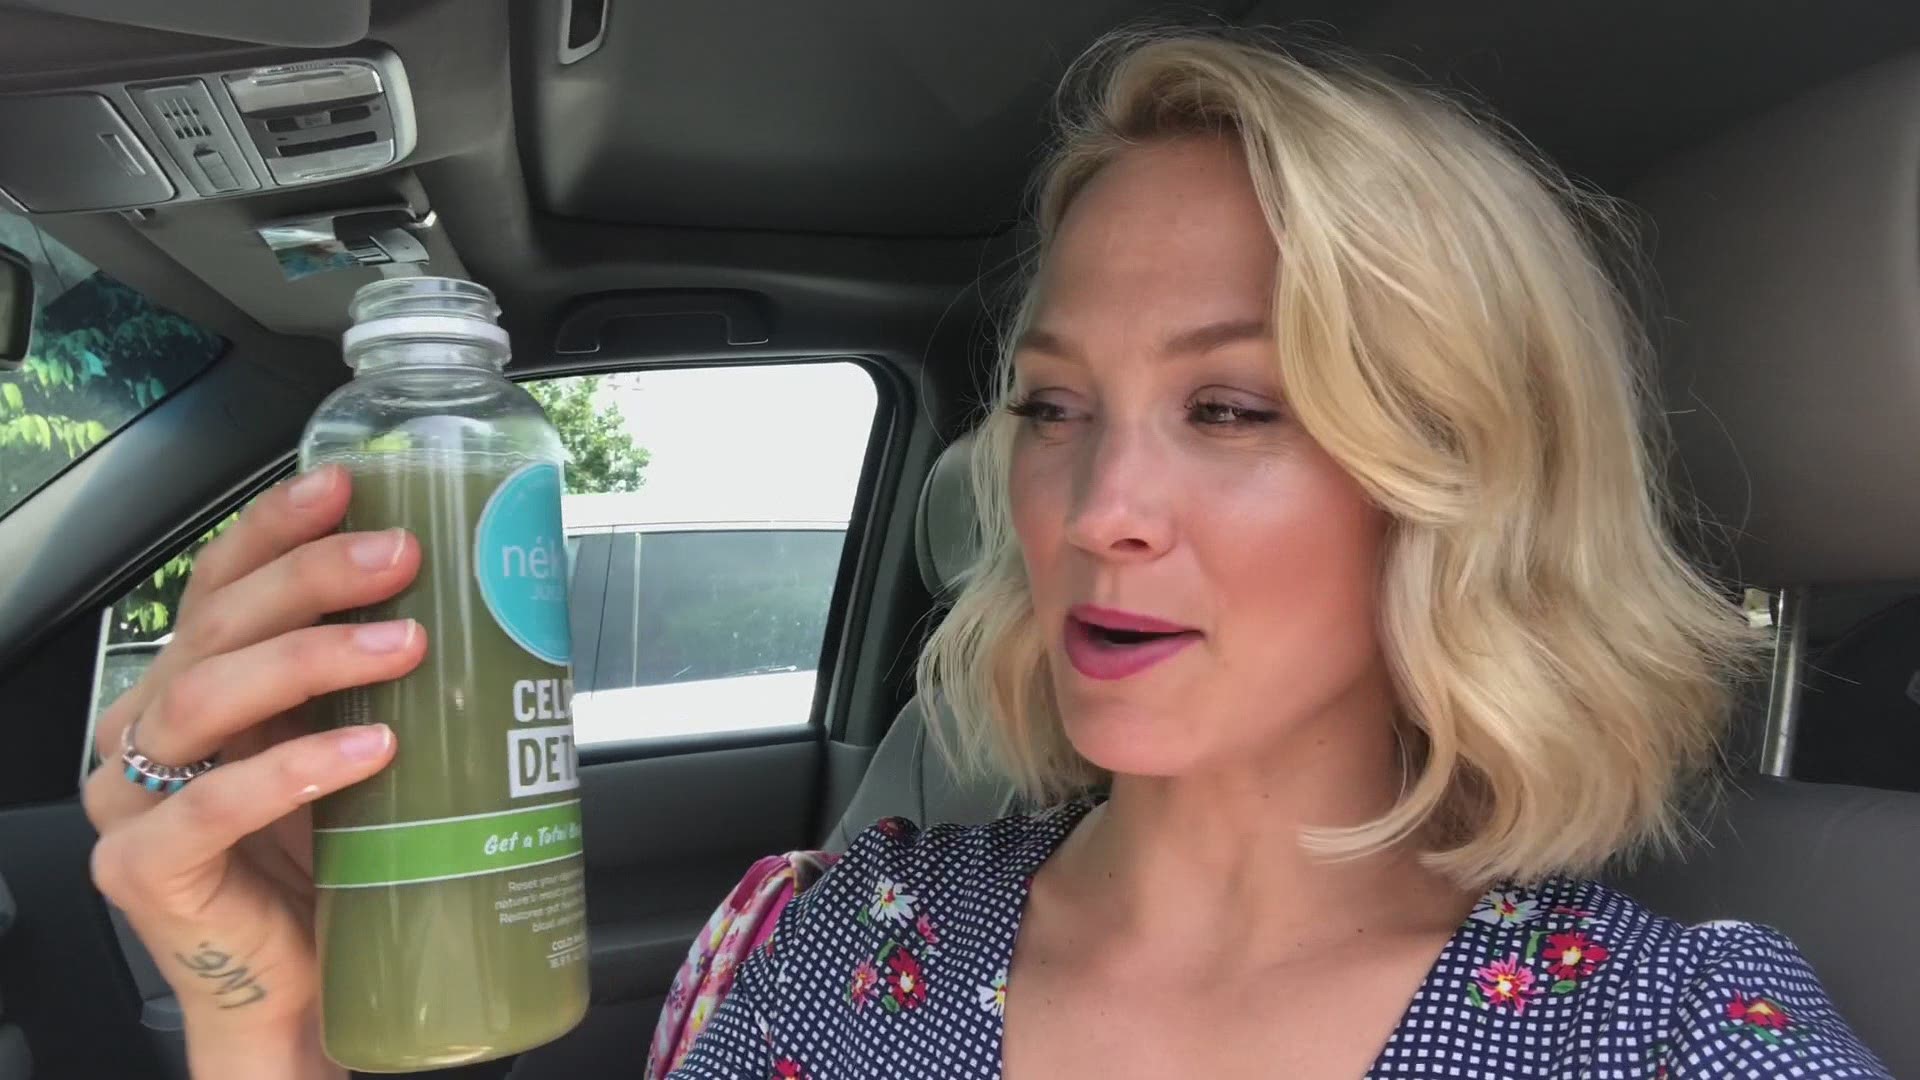 Alexa Lee continues her trial of the celery juice diet. Here are her thoughts on Day 3.